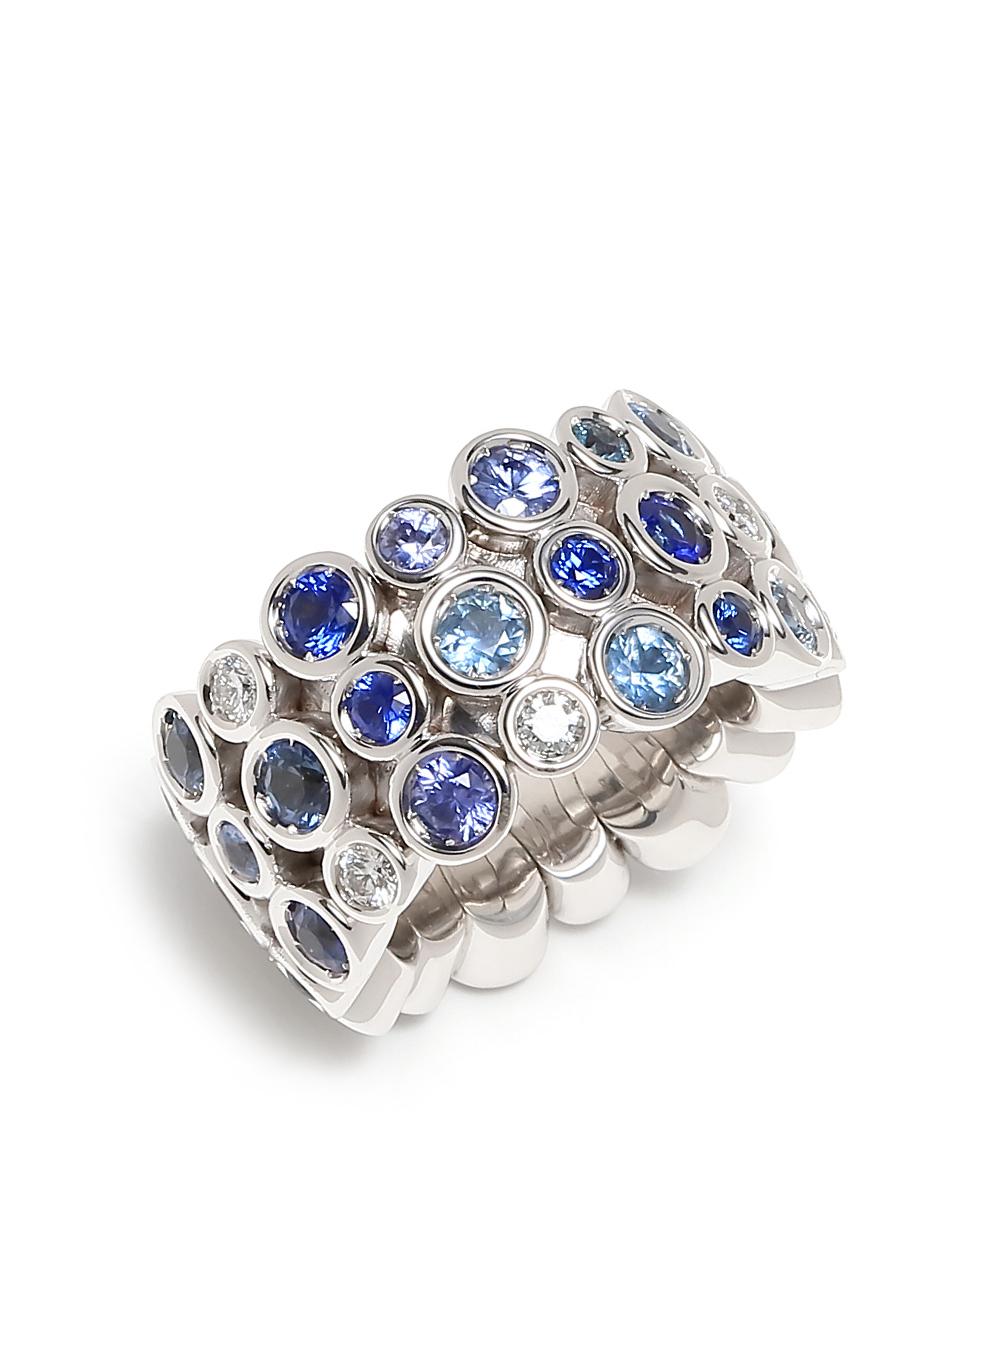 Multi Color Blue Eternity Patterns Ring

Blue Sapphire Diamond Flexible Bezel Eternity 18 Karat White Gold Ring Band

Jewels inspired by the colourful Art Deco movement. Lively designs and colorful Interpretations in a triple row eternity band